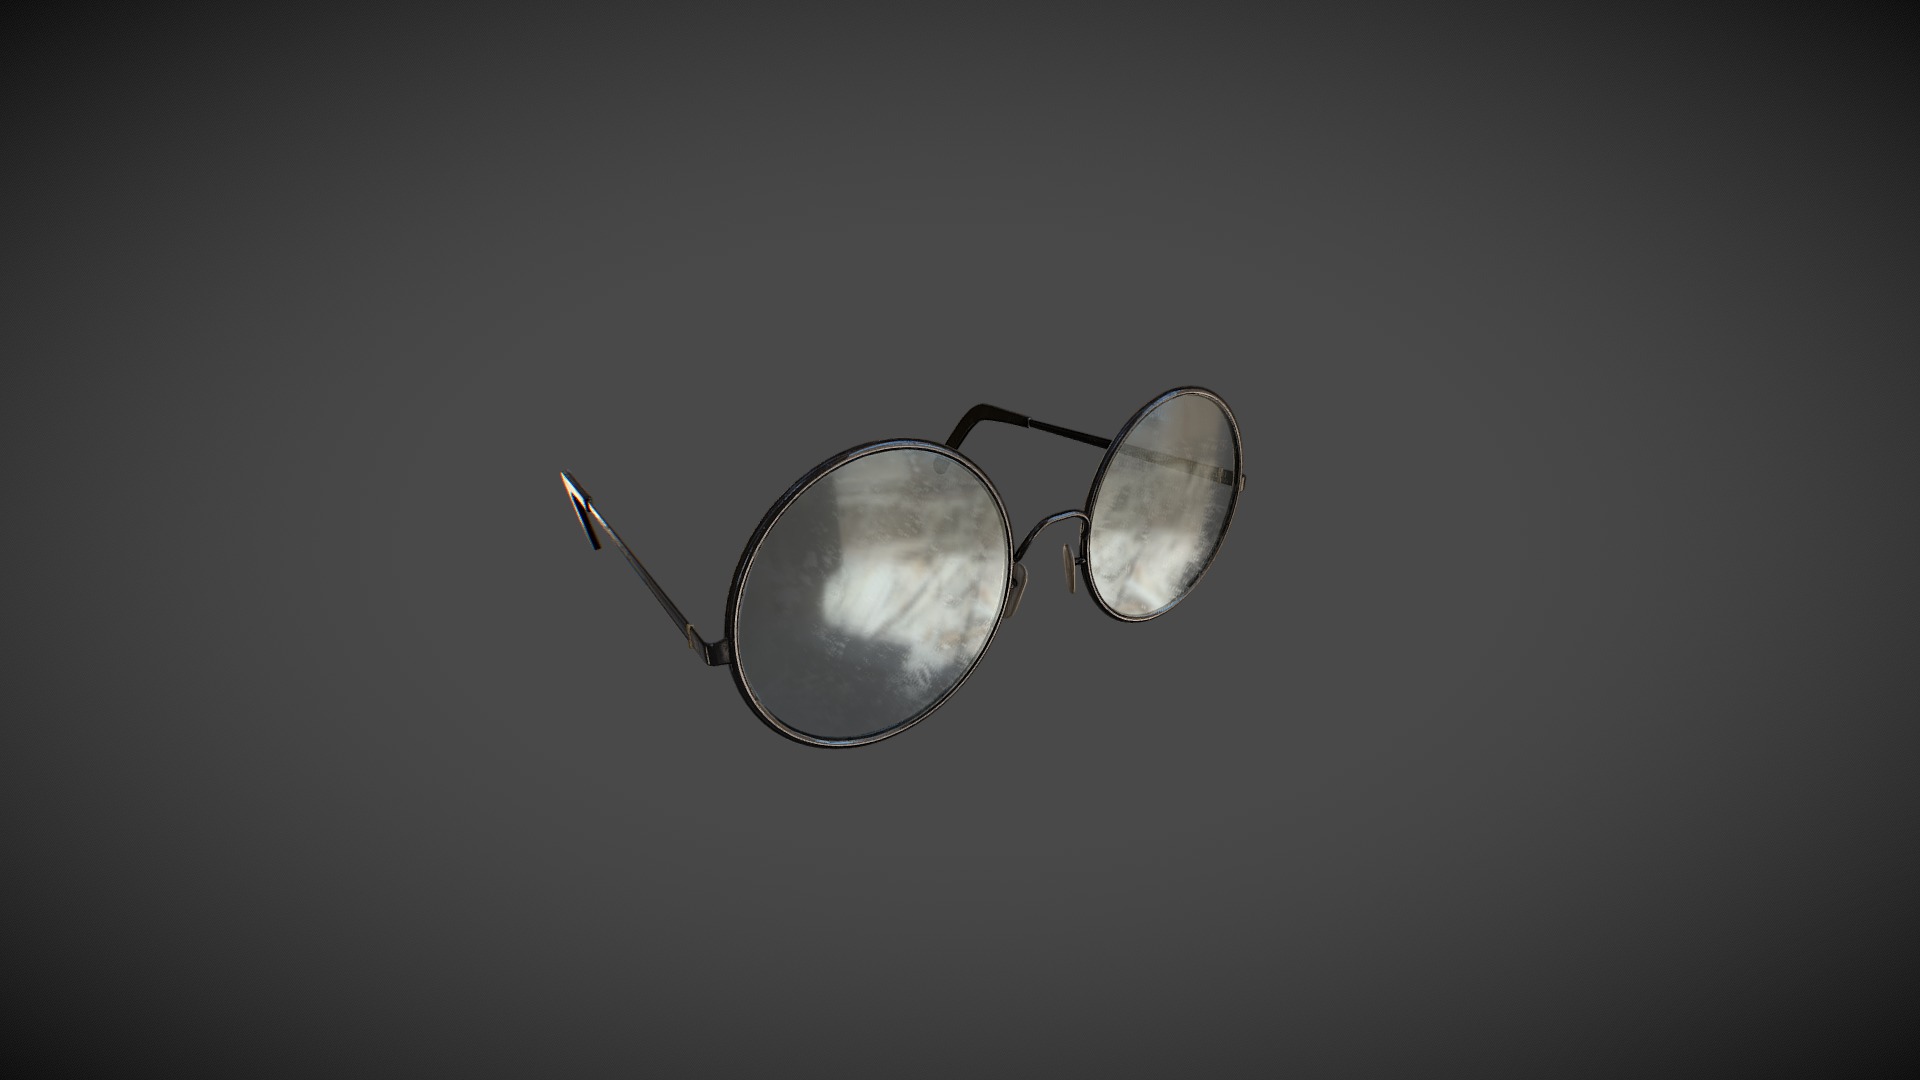 3D model Old Glasses v2 - This is a 3D model of the Old Glasses v2. The 3D model is about a light fixture on a ceiling.